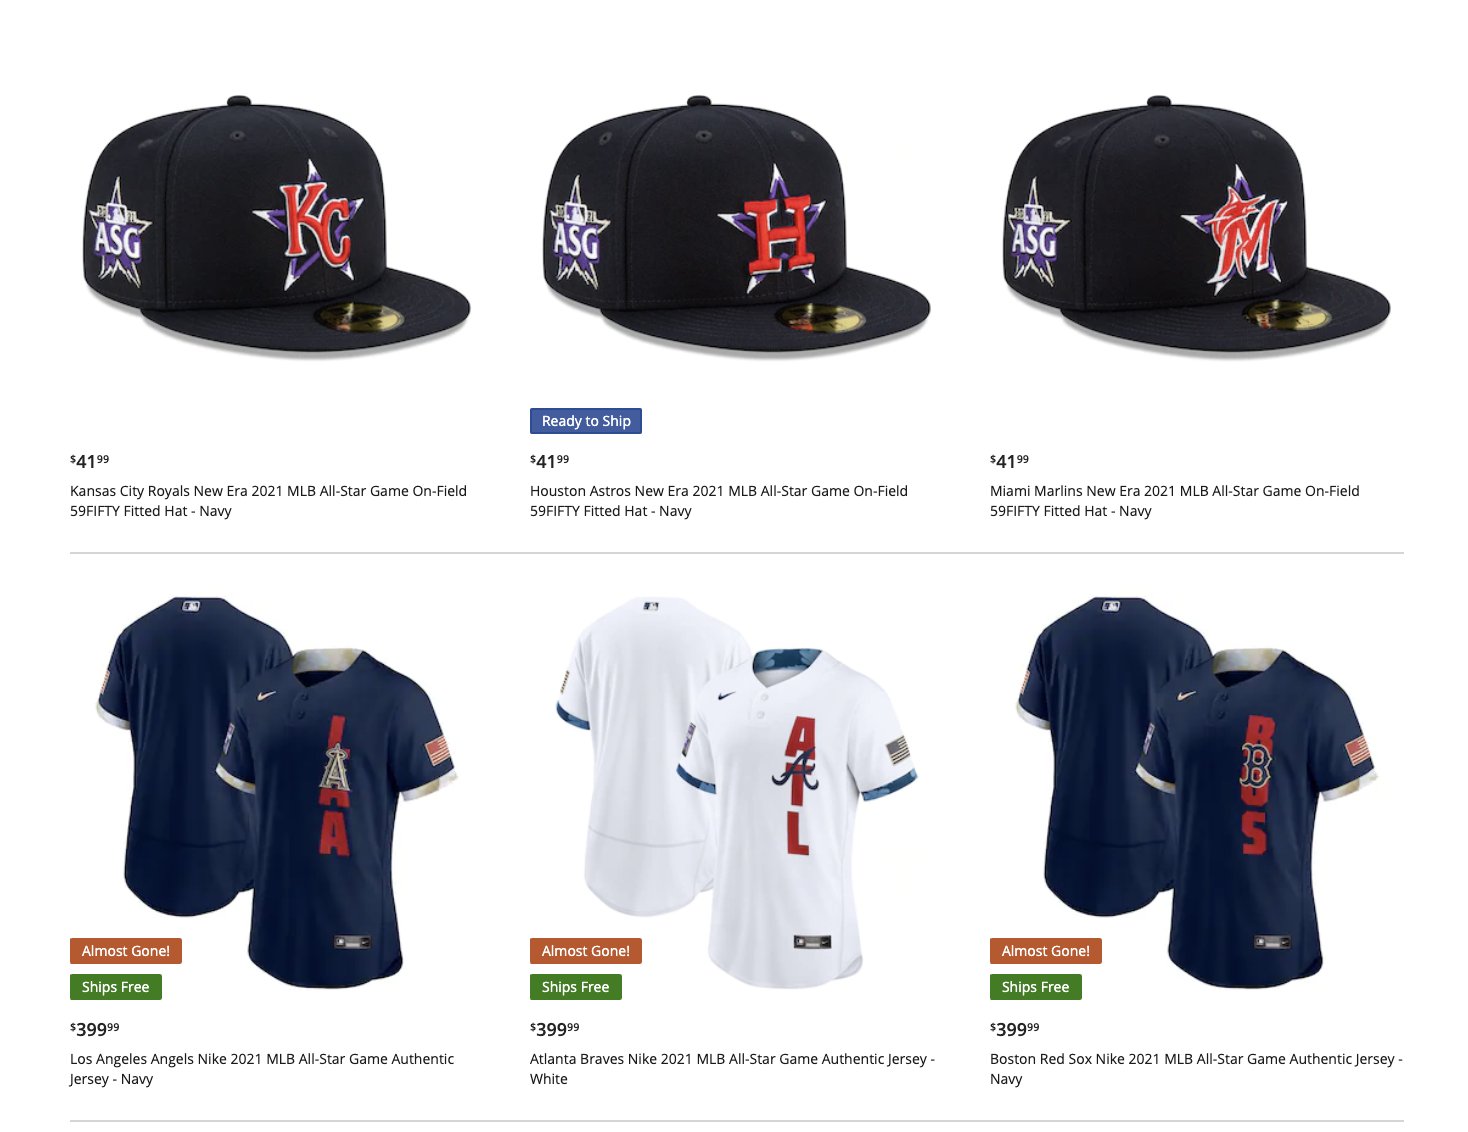 2021 MLB All-Star Game Cap And Jersey Break From Tradition